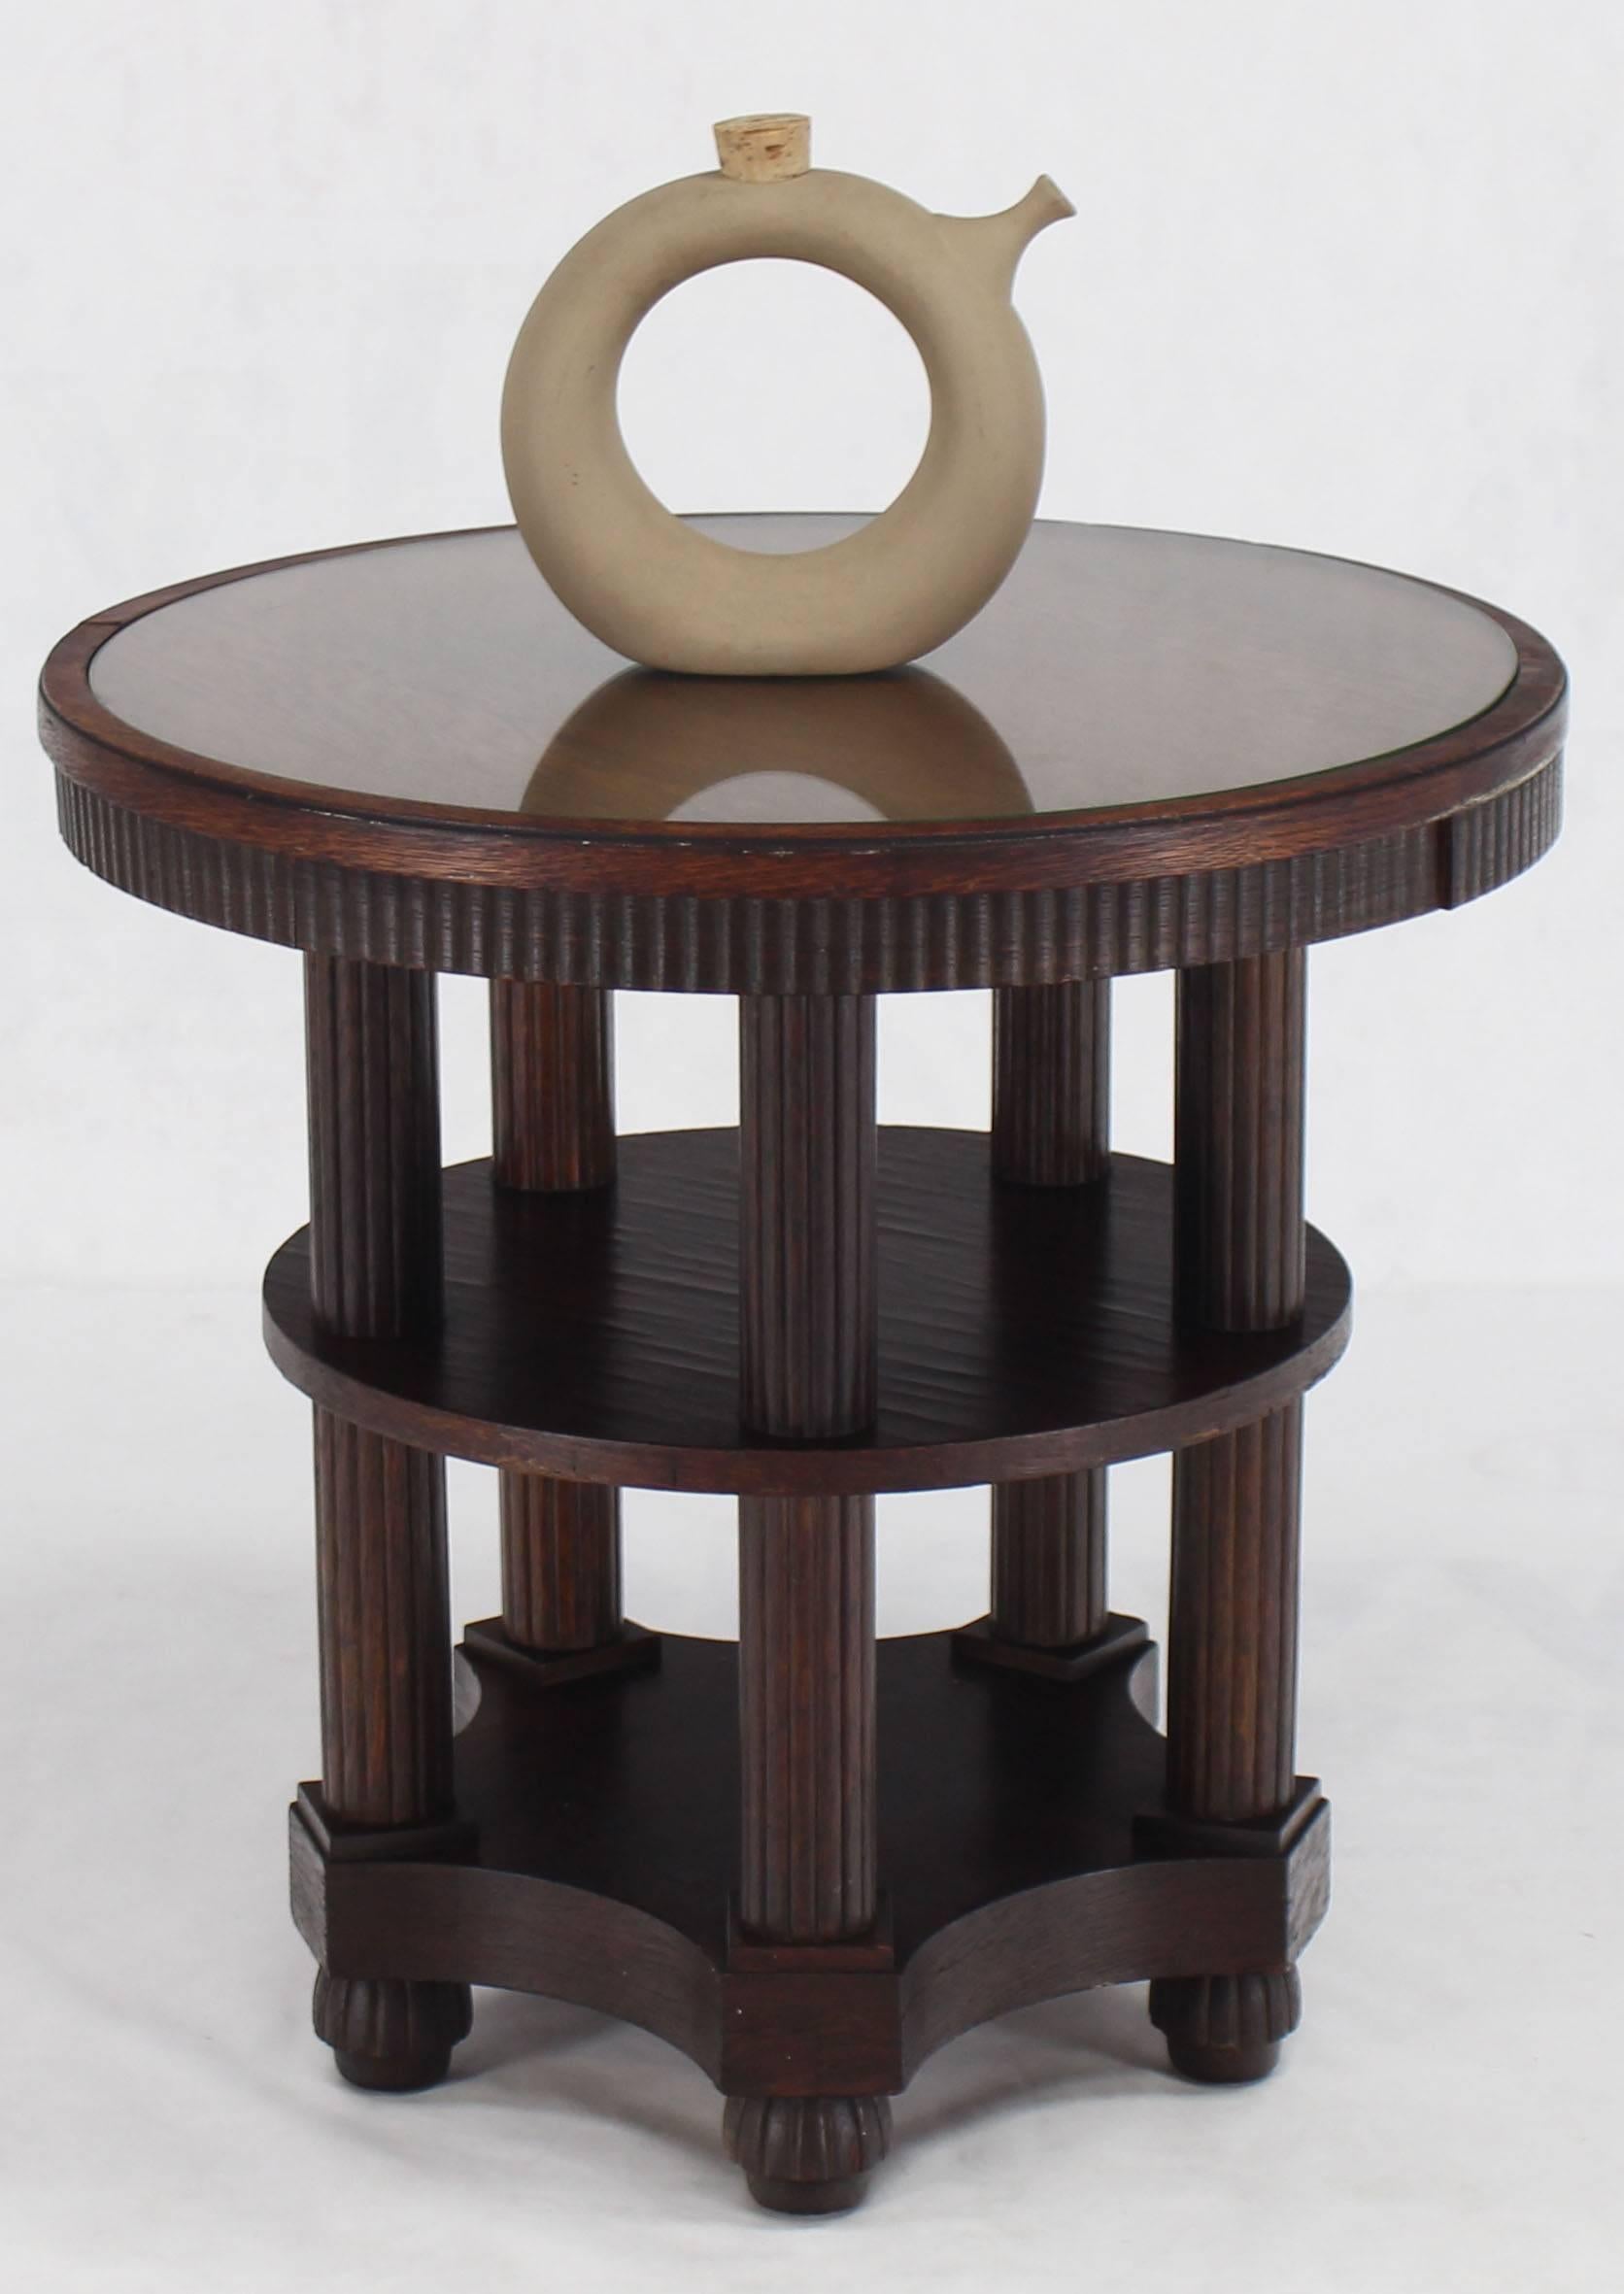 Unusual gueridon lamp table on five point star base with fluted legs.